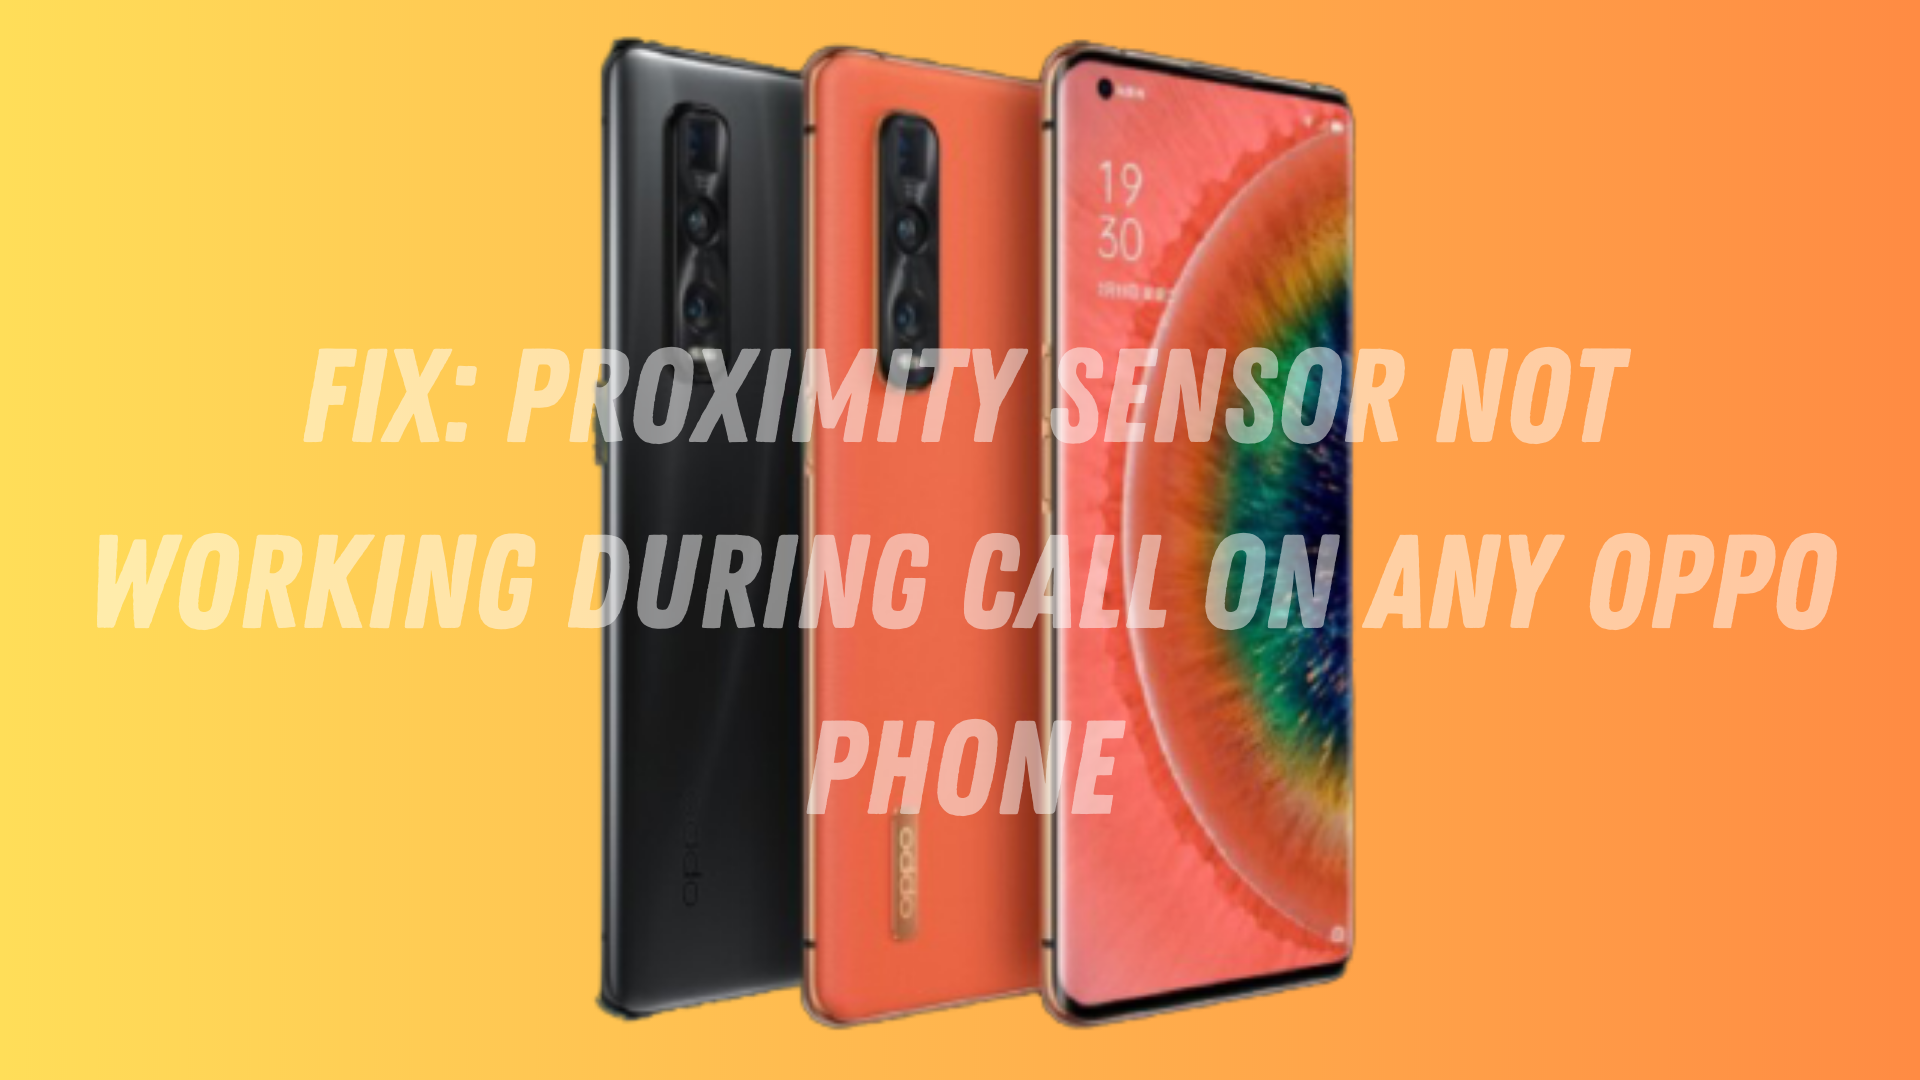 Fix: Proximity Sensor Not Working During Call on Any OPPO Phone